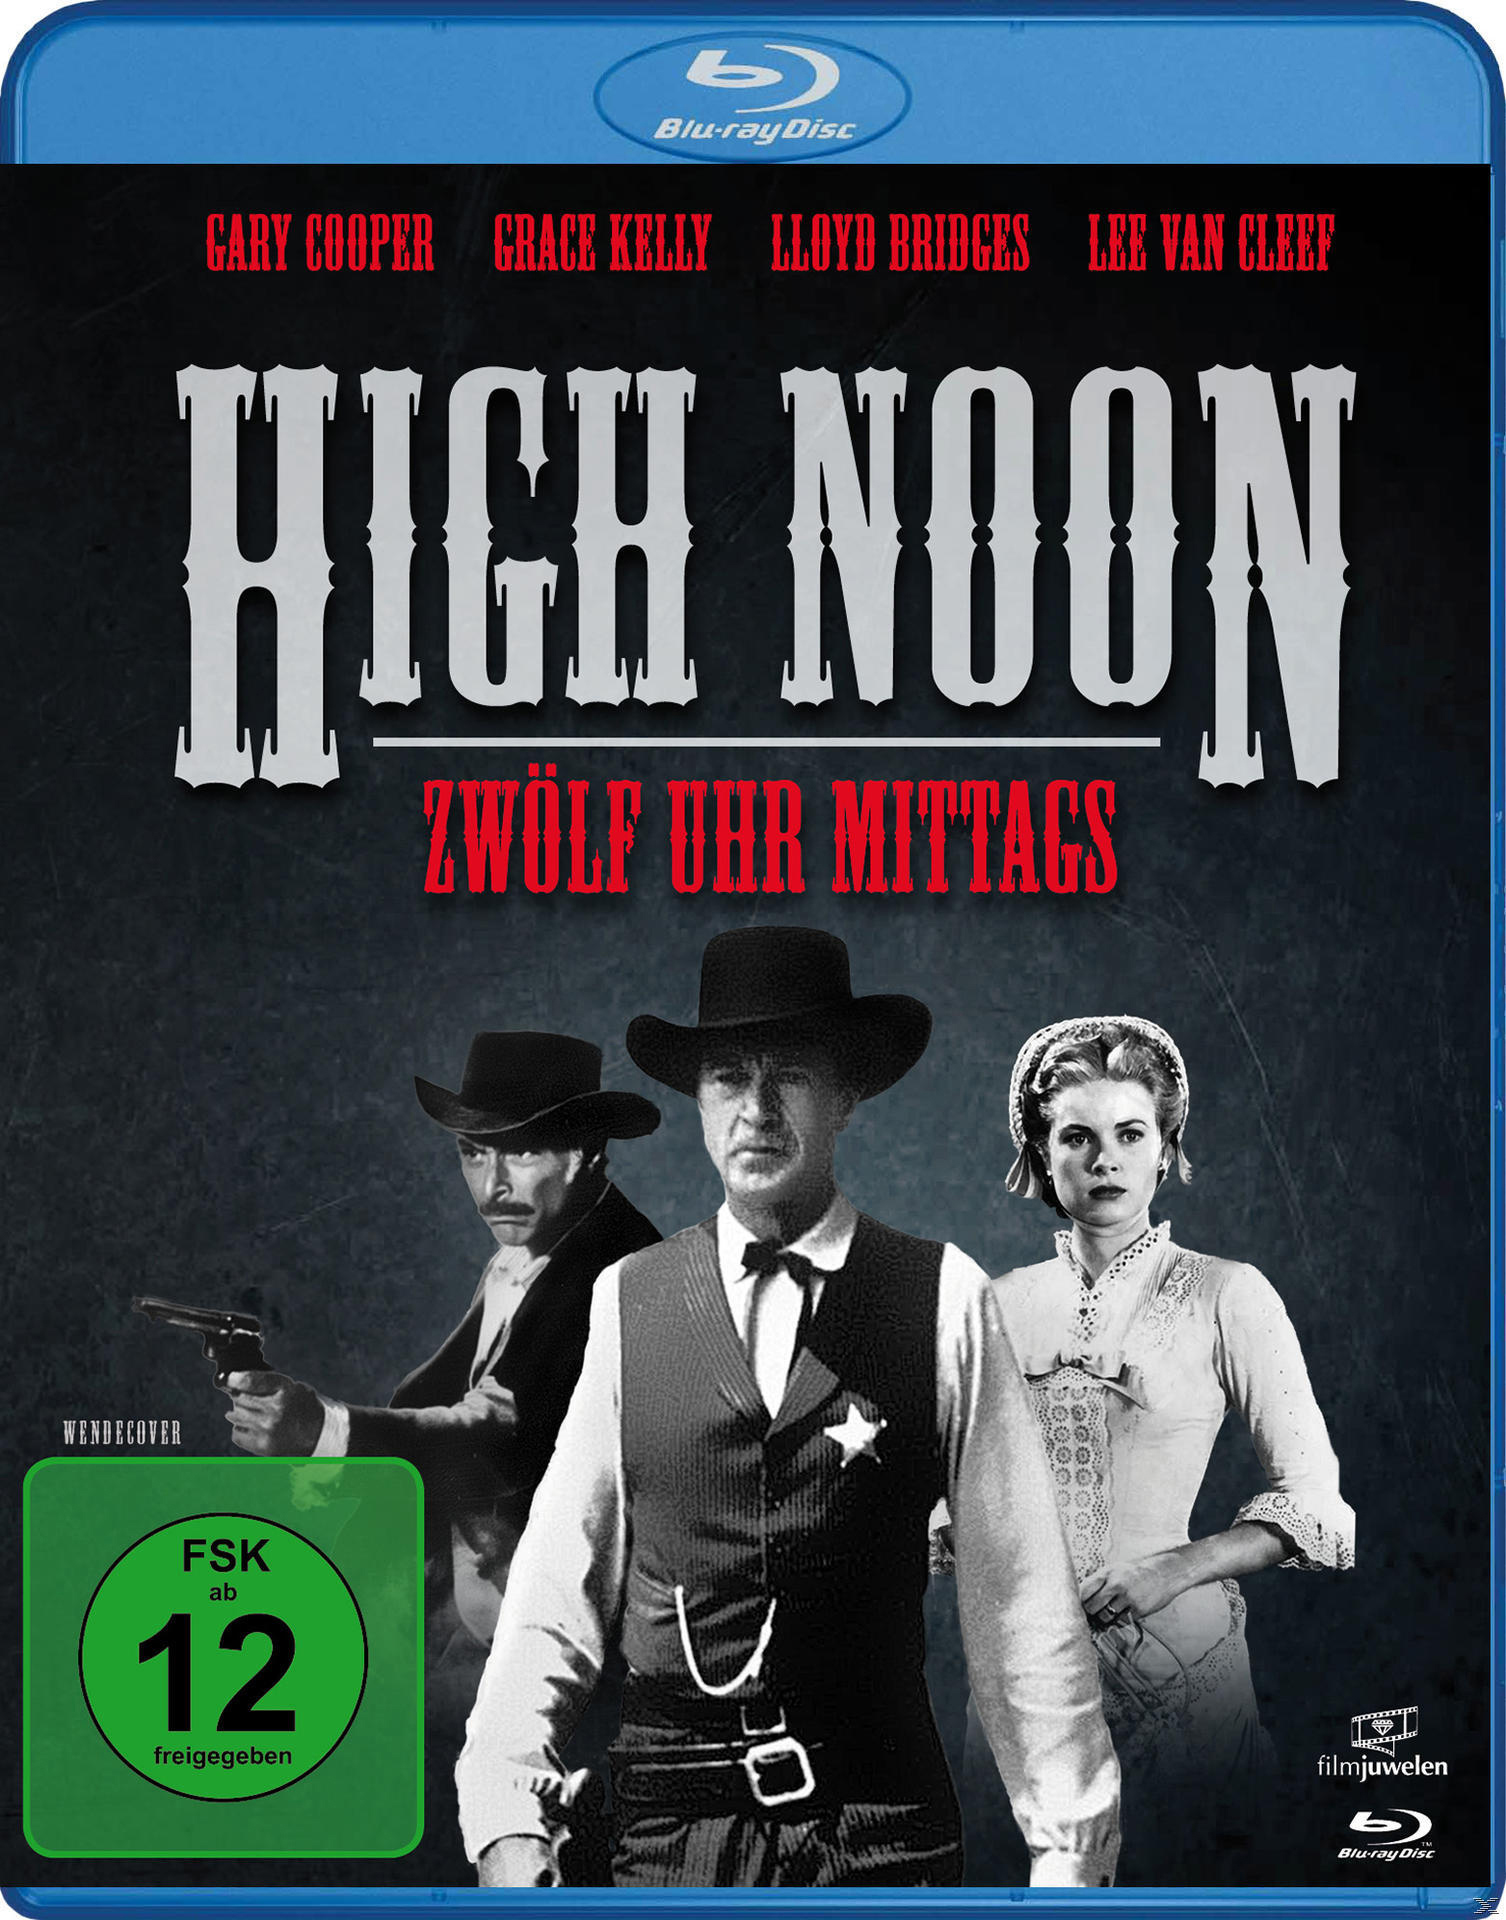 Blu-ray 12 mittags - Uhr High Noon